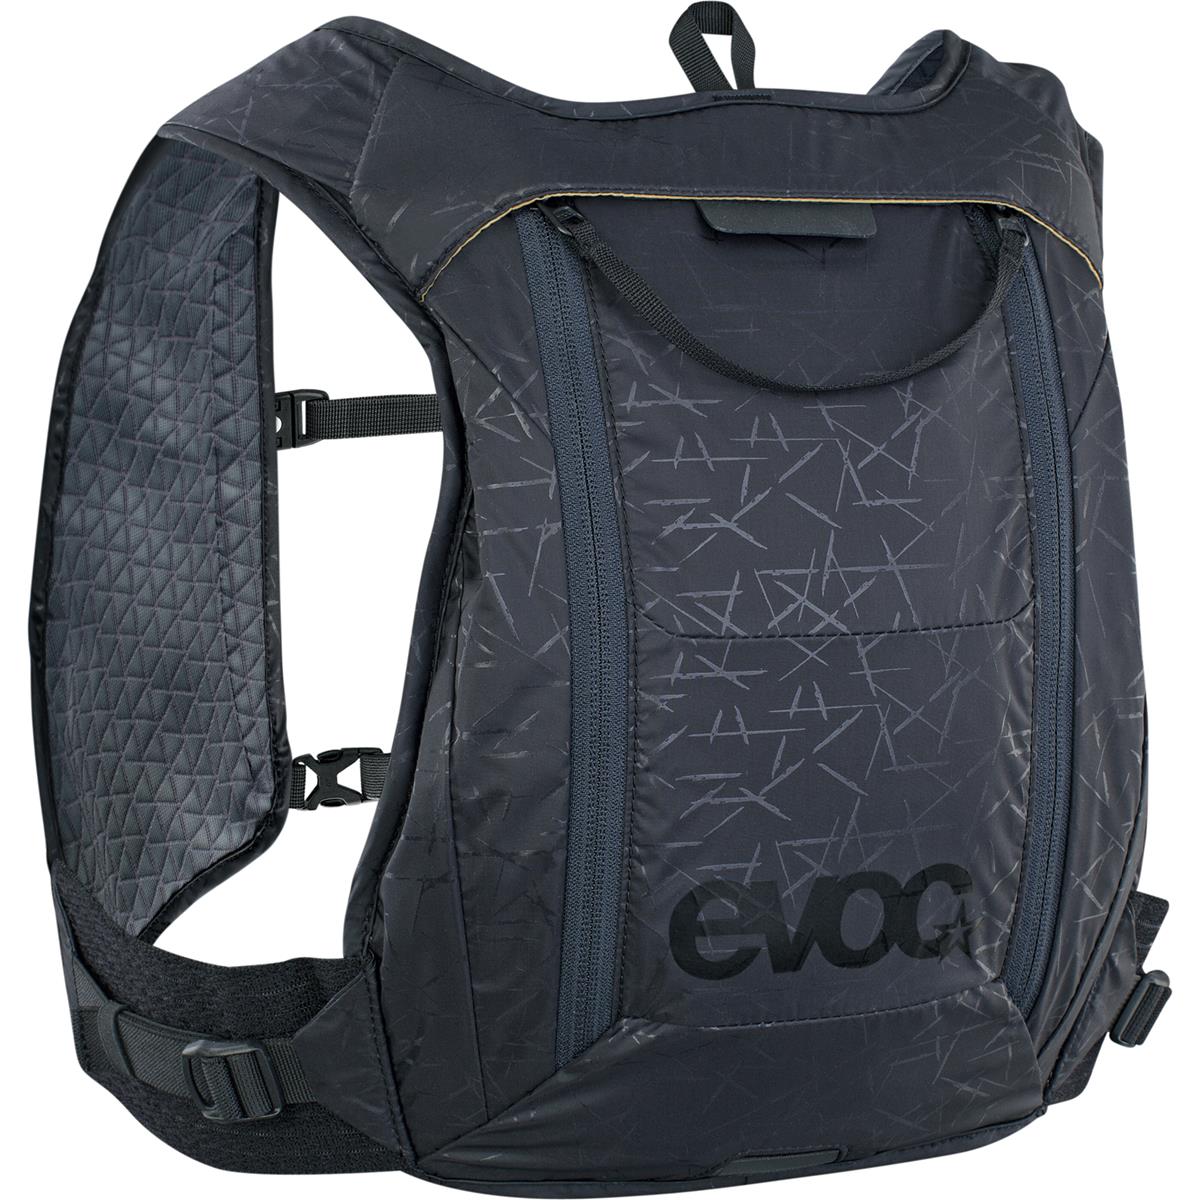 Evoc Backpack with Hydration System Compartment Hydro Pro 1.5 Black